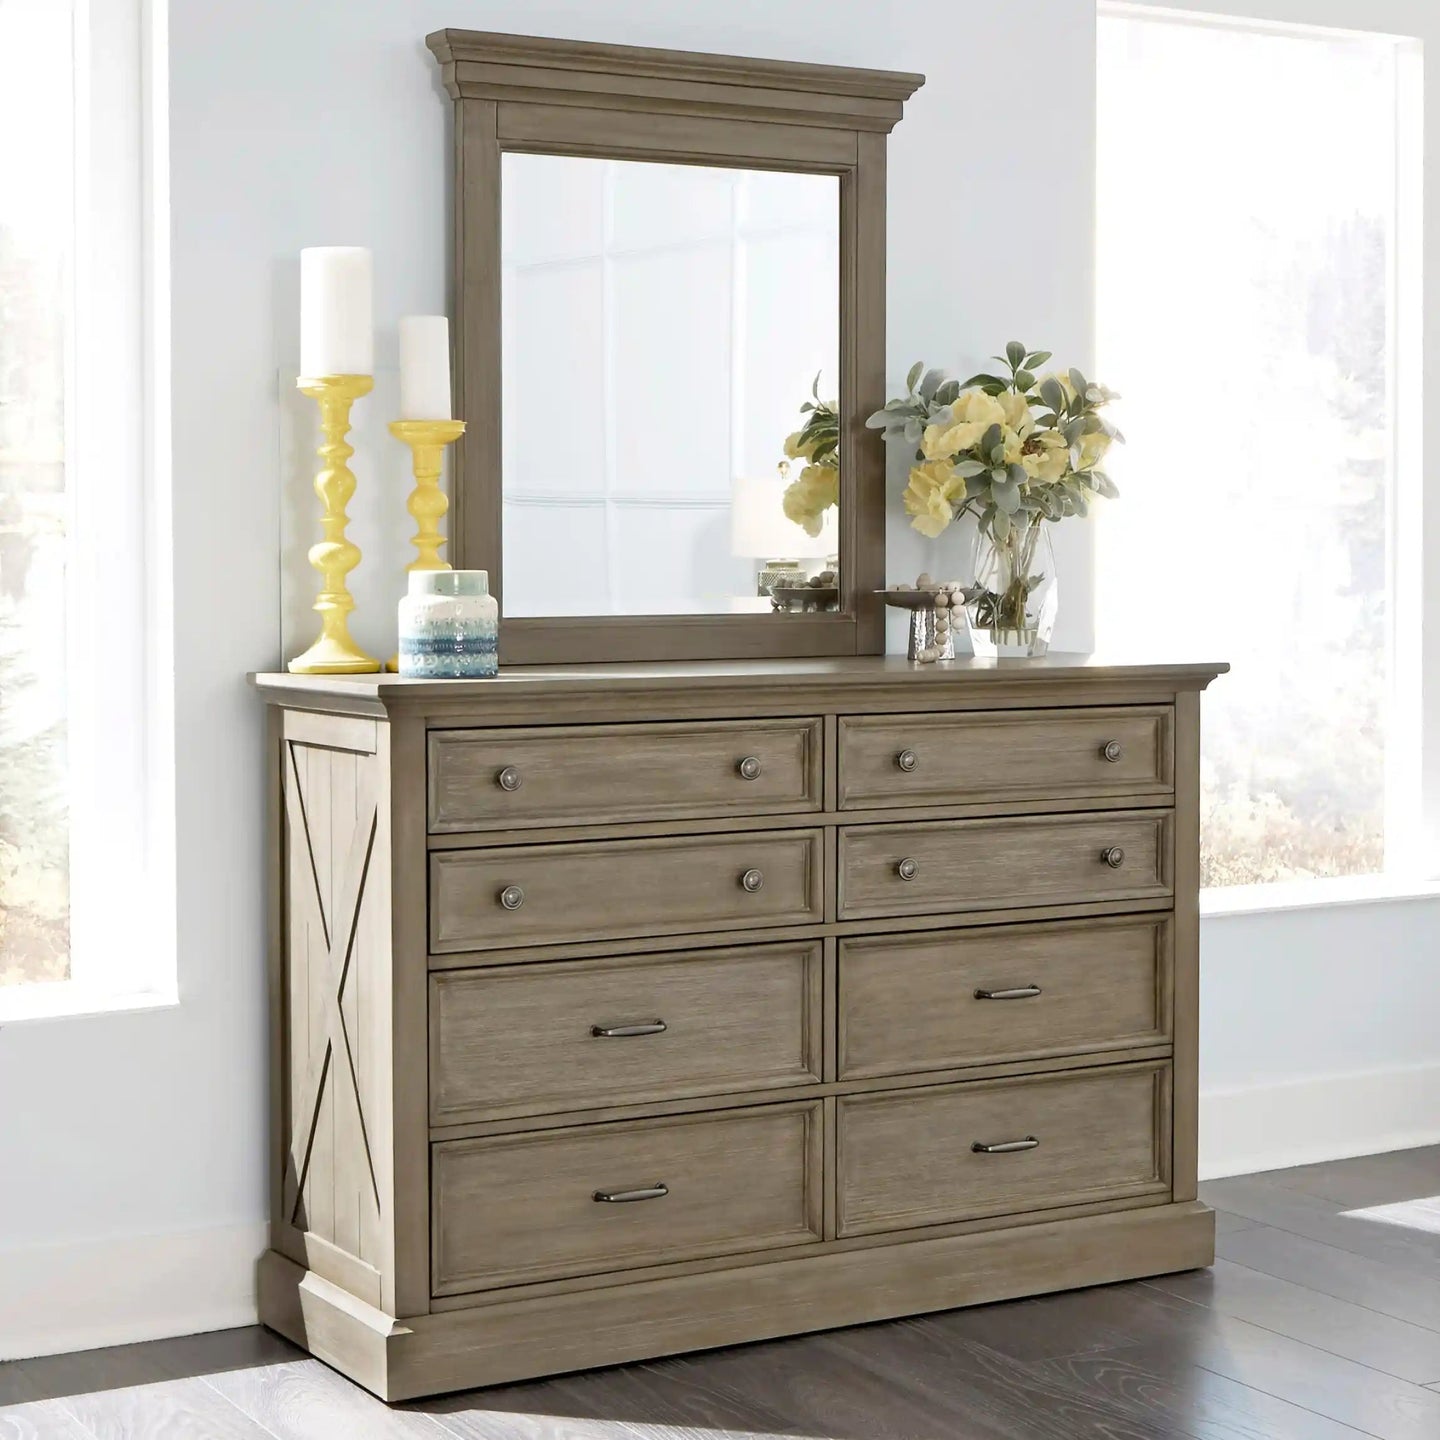 Homestyles Mountain Lodge Gray Dresser with Mirror